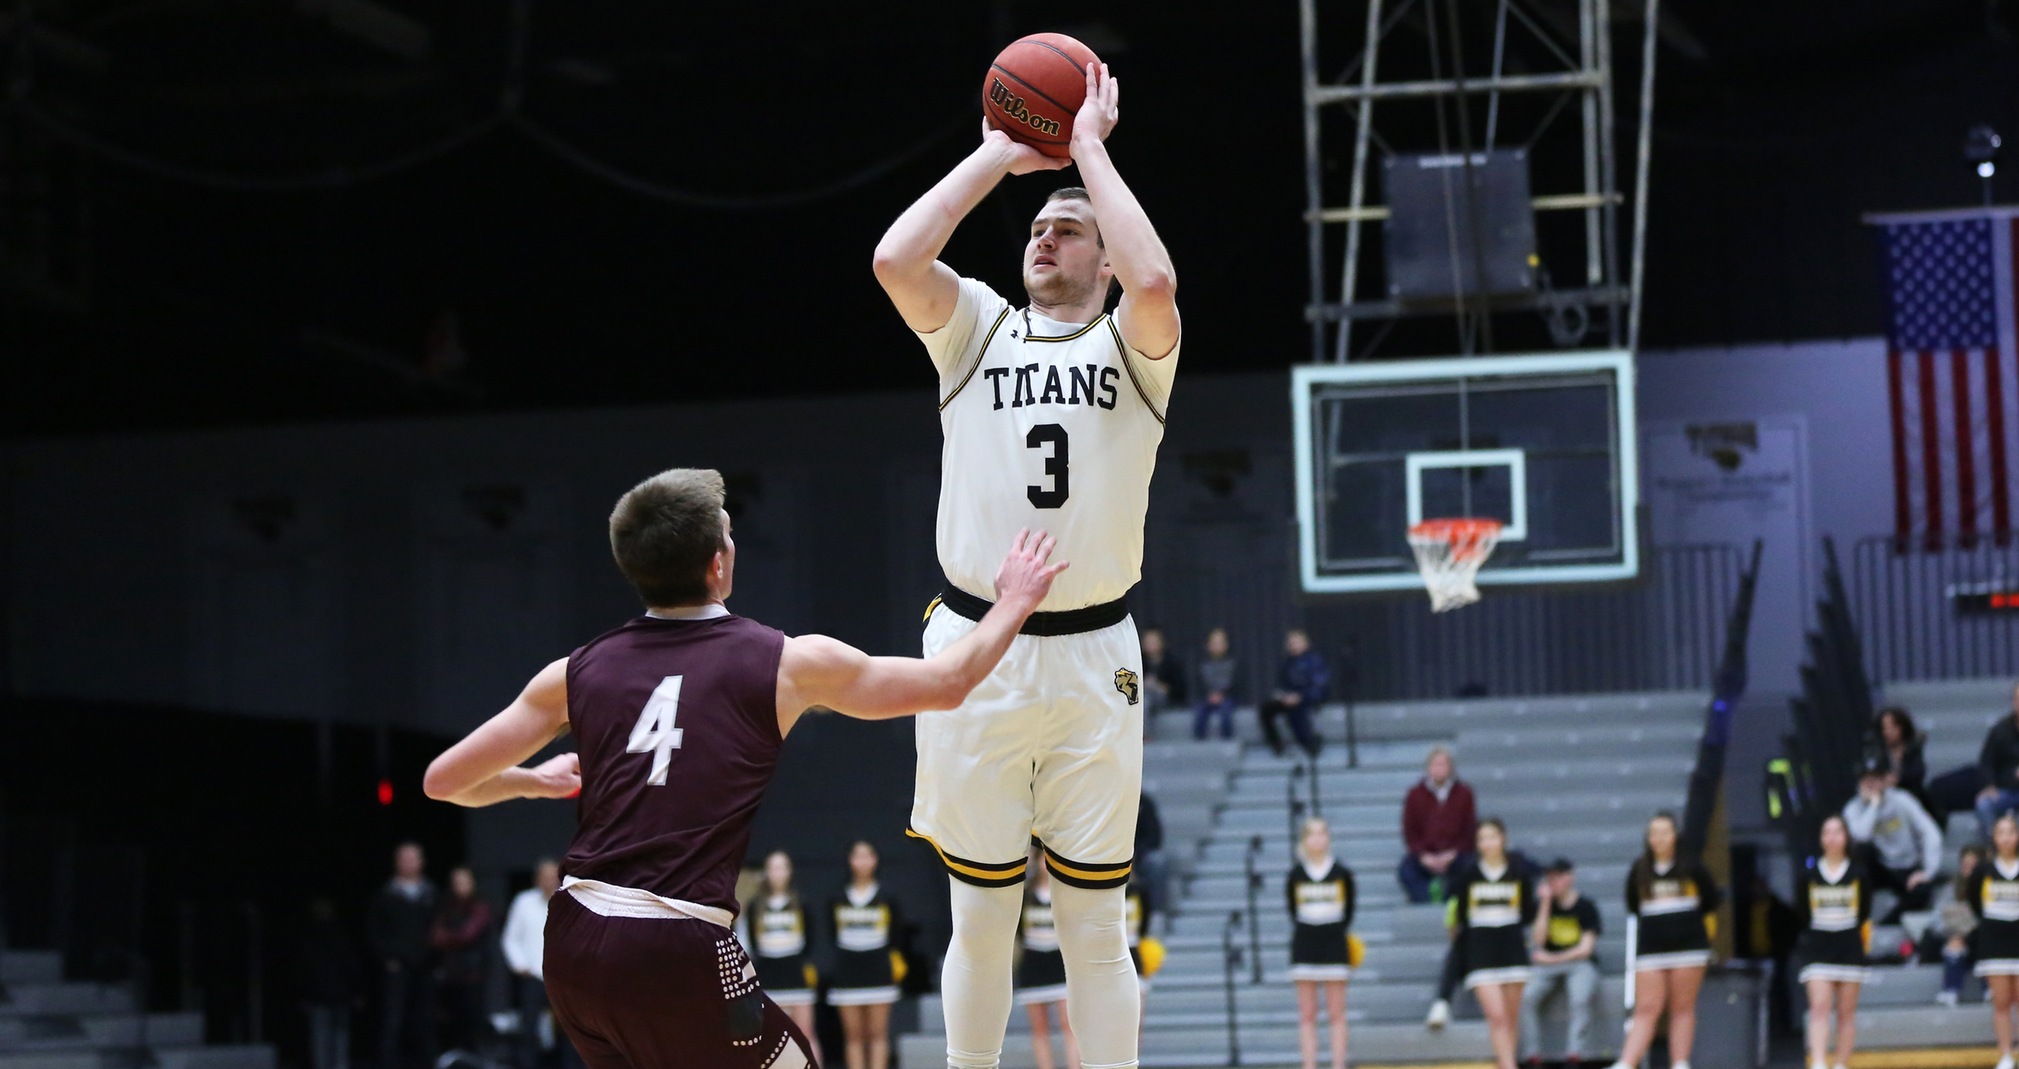 David Vlotho's 3-pointer with 8.8 seconds left helped UW-Oshkosh defeat UW-Whitewater and extend its winning streak to five games.